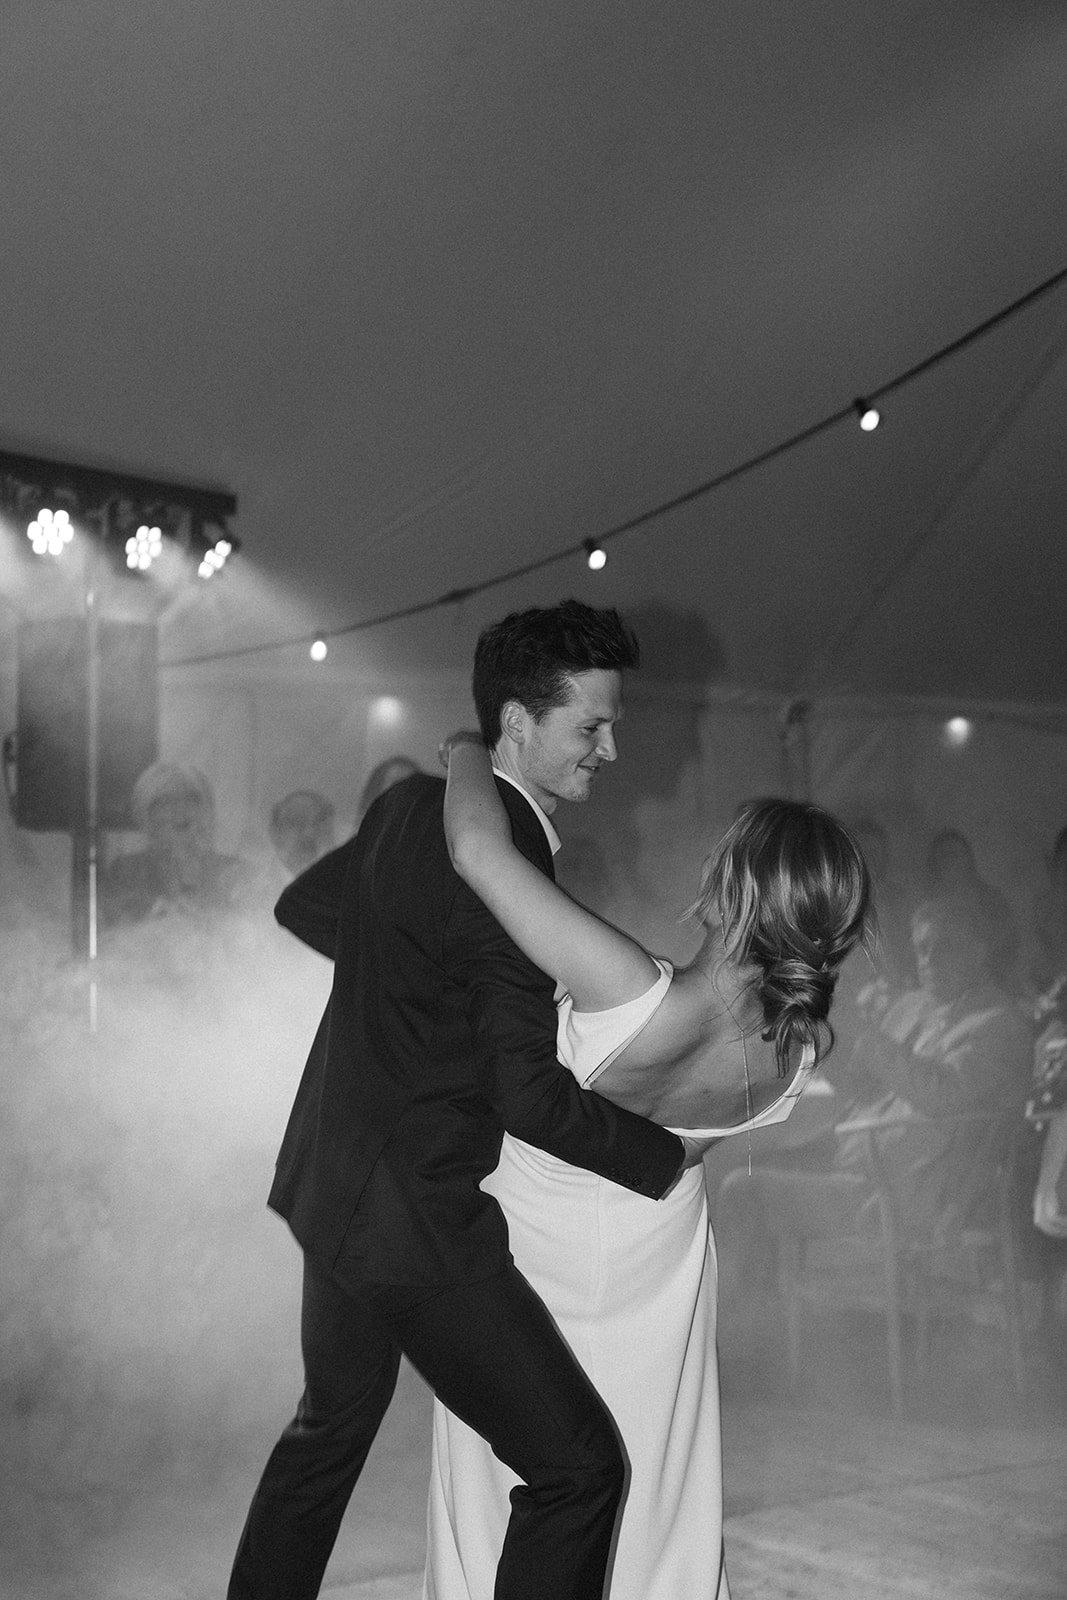 Intimate moments of the couple's first dance, filled with emotion